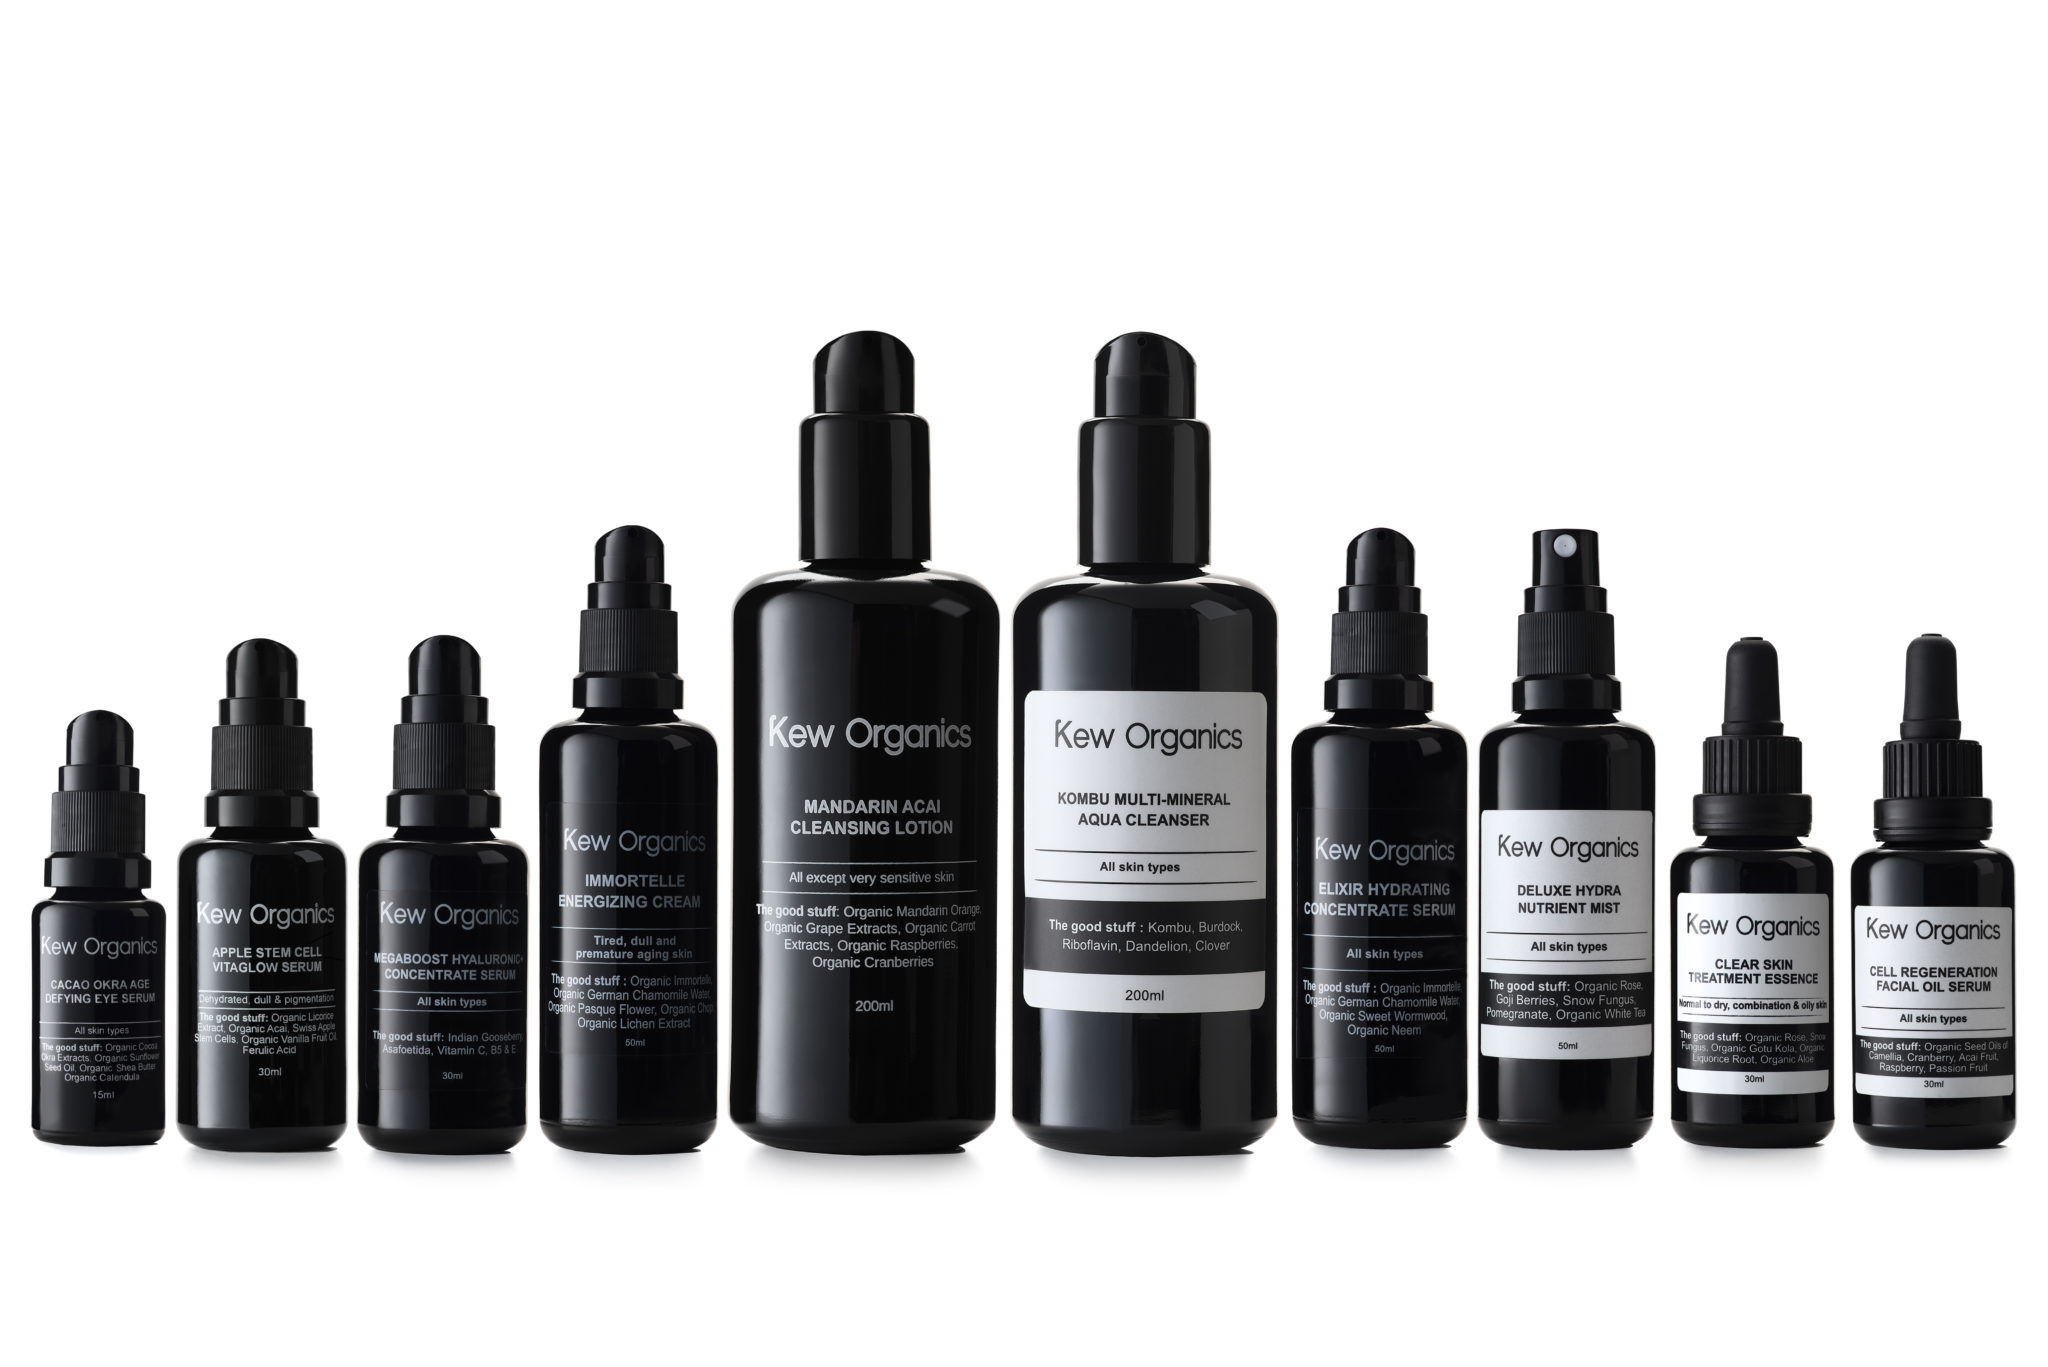 a line up of various Kew Organics cosmetic products shot in studio for a commercial